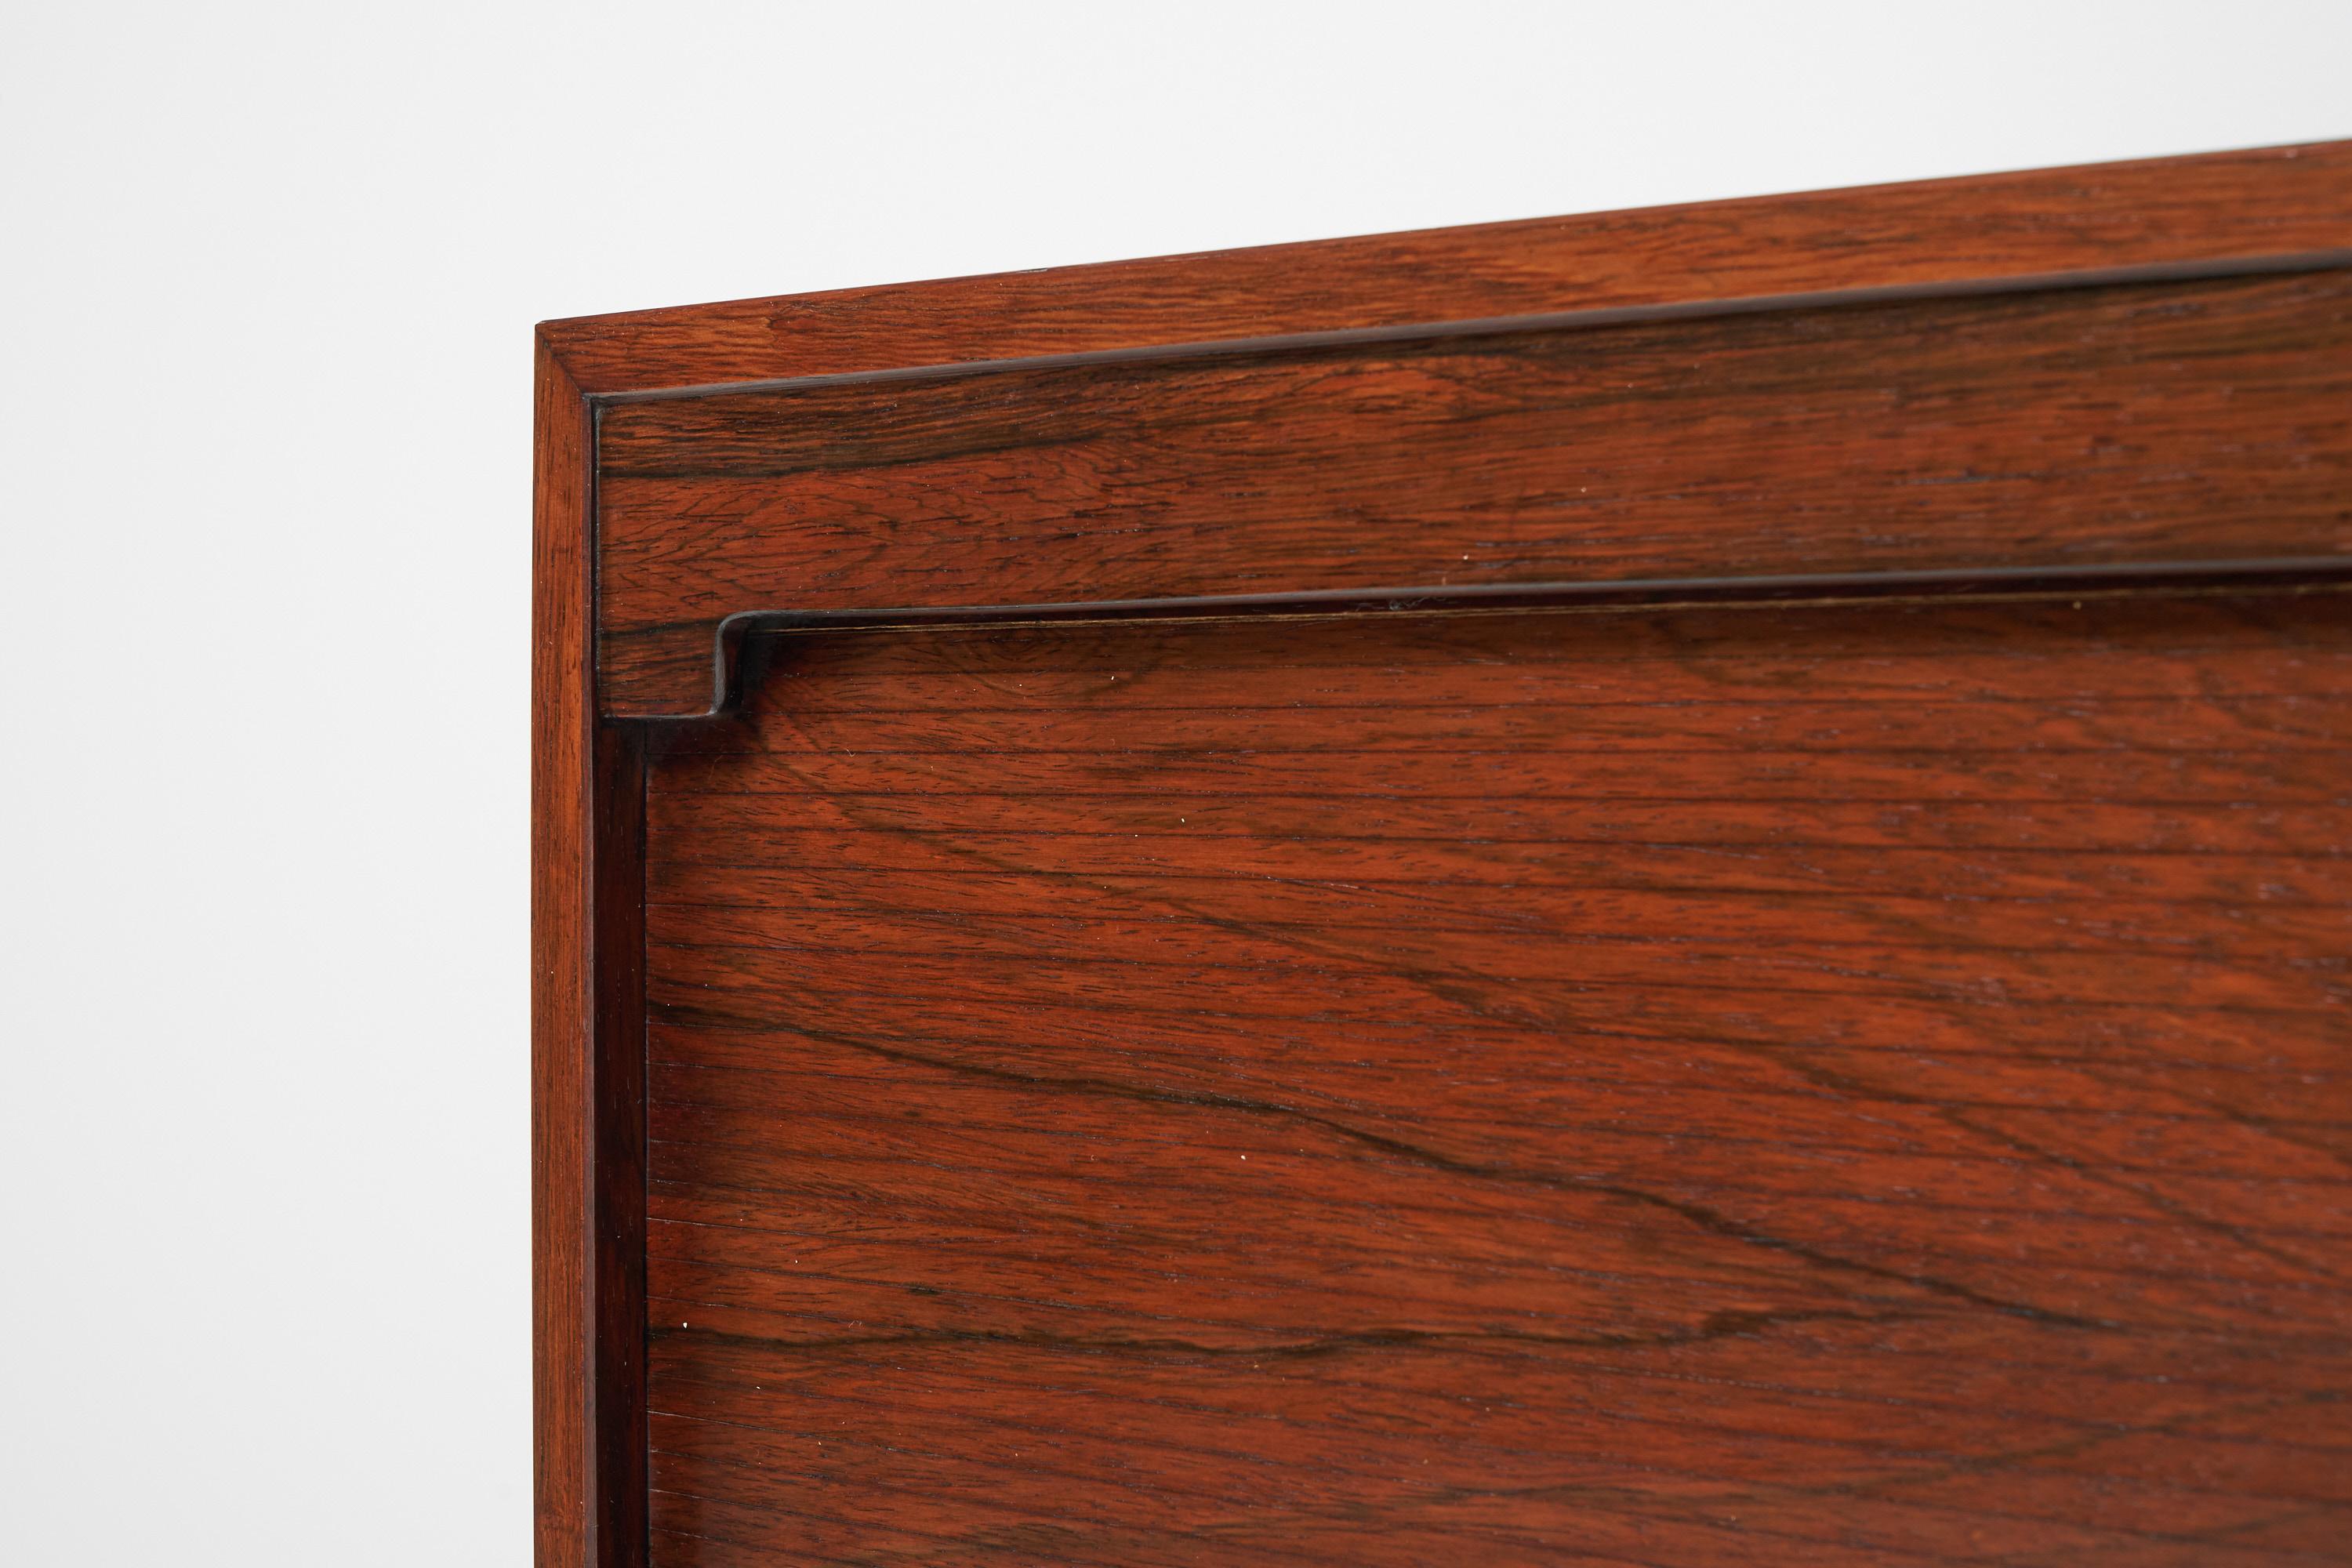 Small sideboard with roll top doors designed by Gianfranco Frattini and manufactured by Bernini, Italy 1957. This small sized sideboard has 2 roll top tambour doors which open horizontally. The cabinet is made of striking rosewood veneer which shows